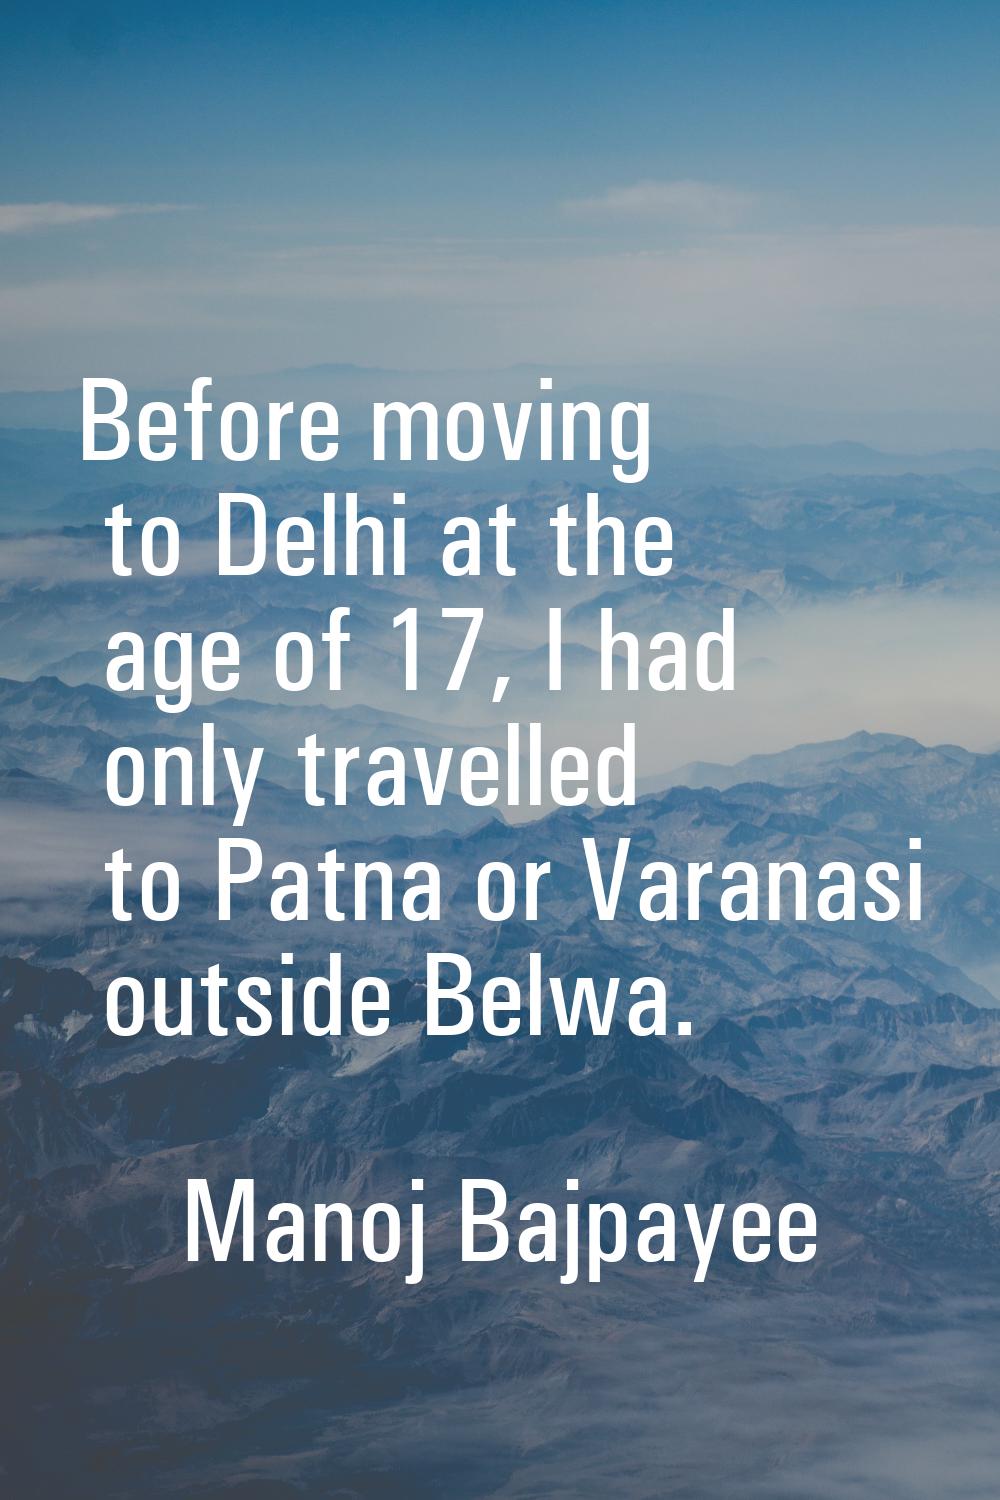 Before moving to Delhi at the age of 17, I had only travelled to Patna or Varanasi outside Belwa.